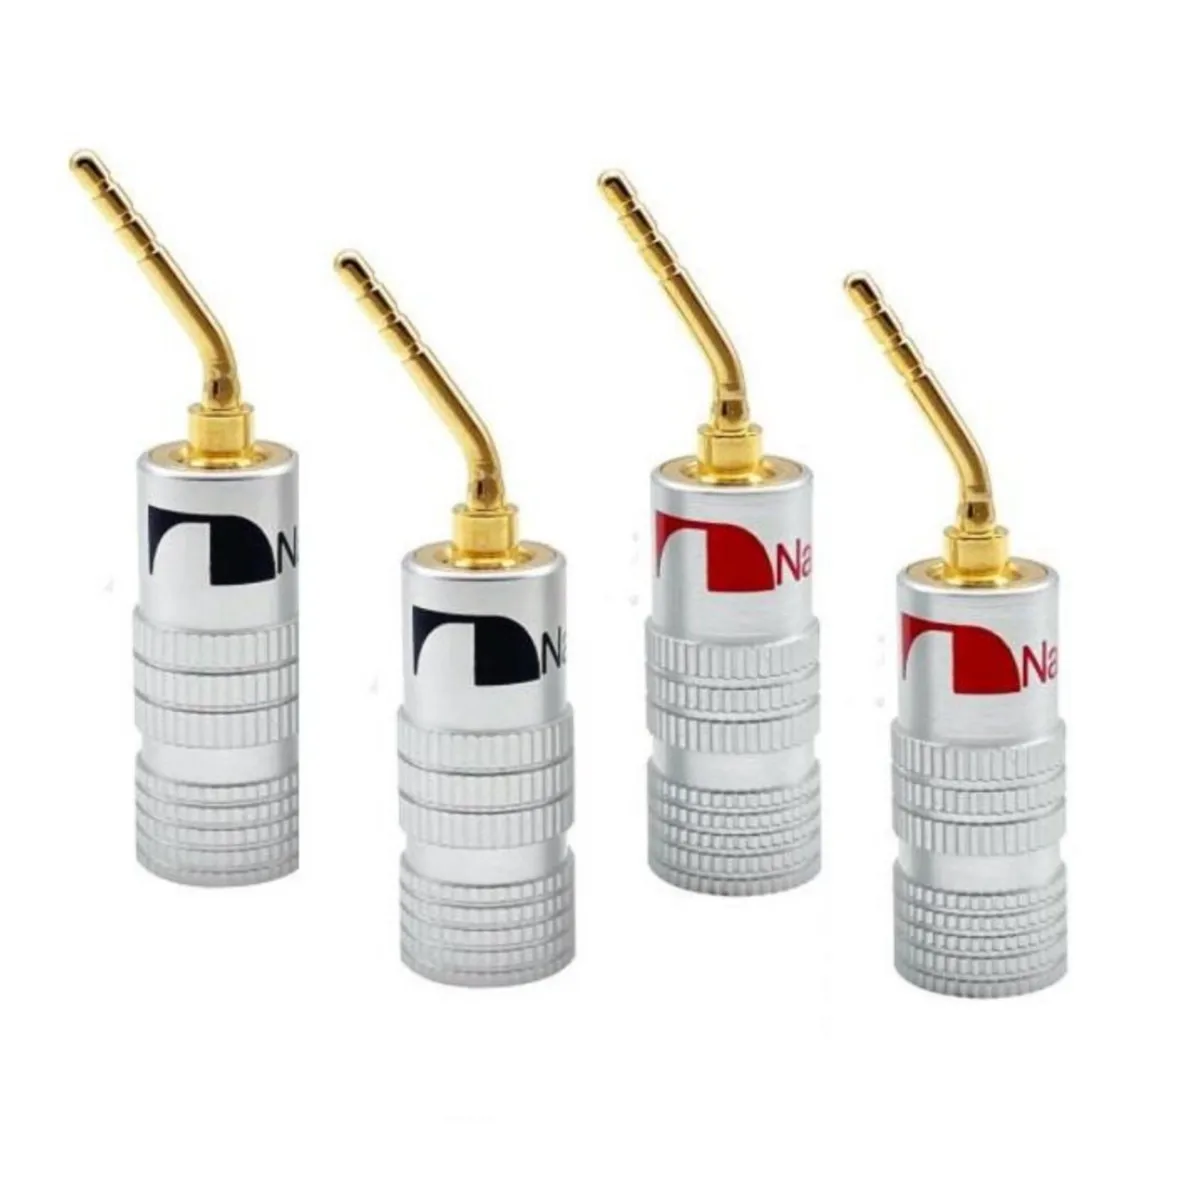 

4pcs Nakamichi Gold-Plated Banana Plugs 4mm Banana Plug For Video Speaker Adapter Audio Jack Plug Wire Cable Connectors